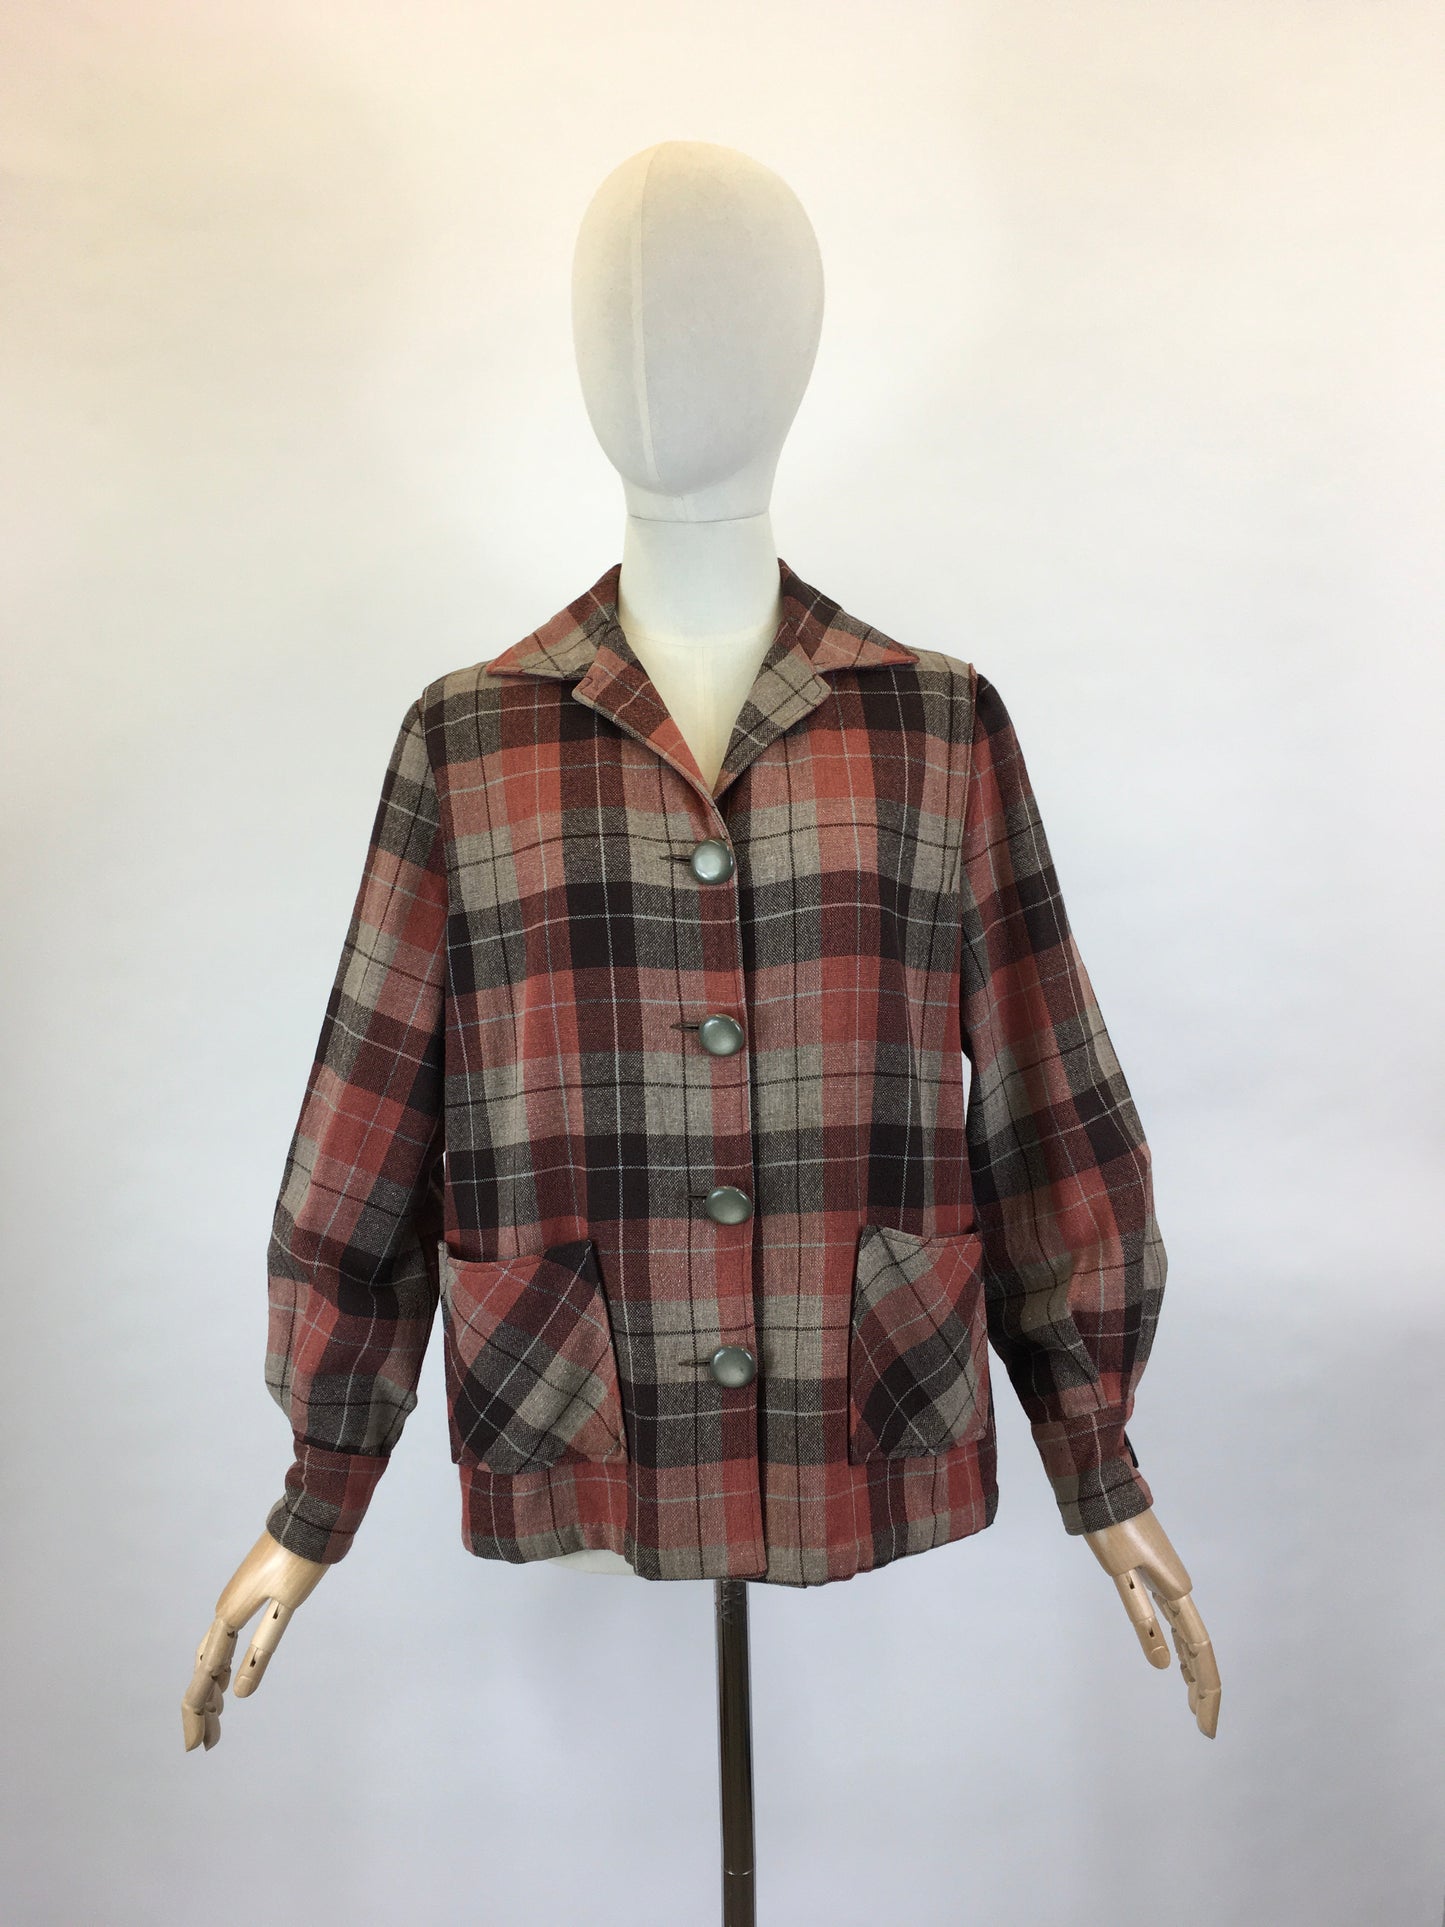 Original 1940’s Plaid Sportwear Jacket - In Autumnal Warm Hues of Spice, Brown and Pale Blue